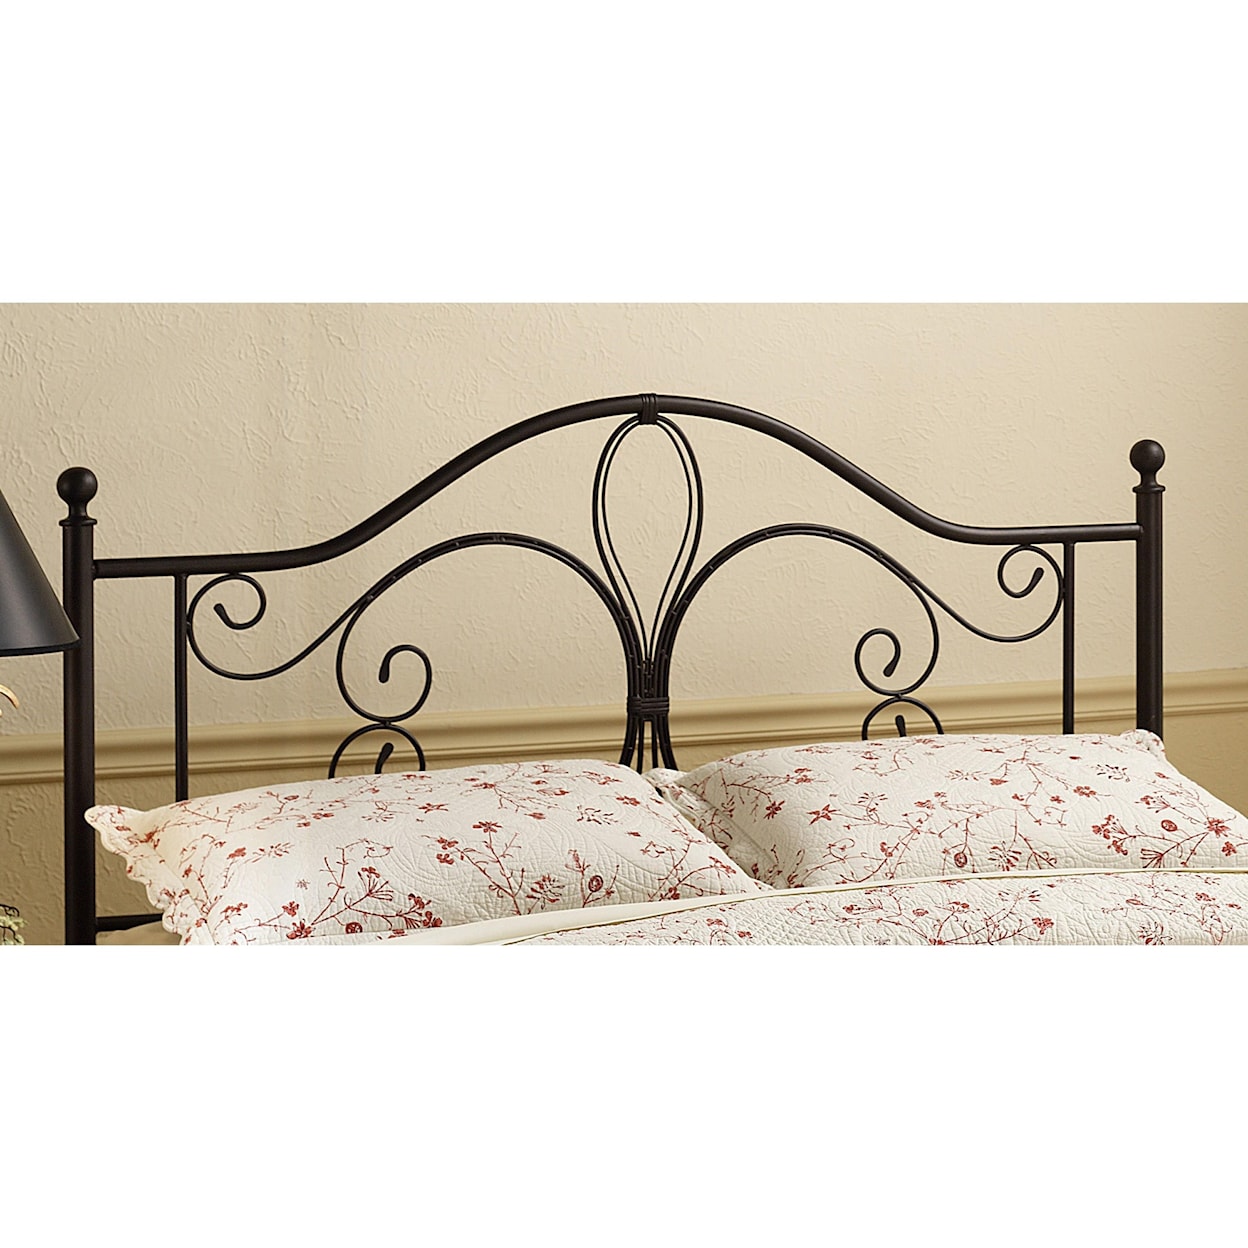 Hillsdale Metal Beds Full/Queen Milwaukee Headboard with Frame